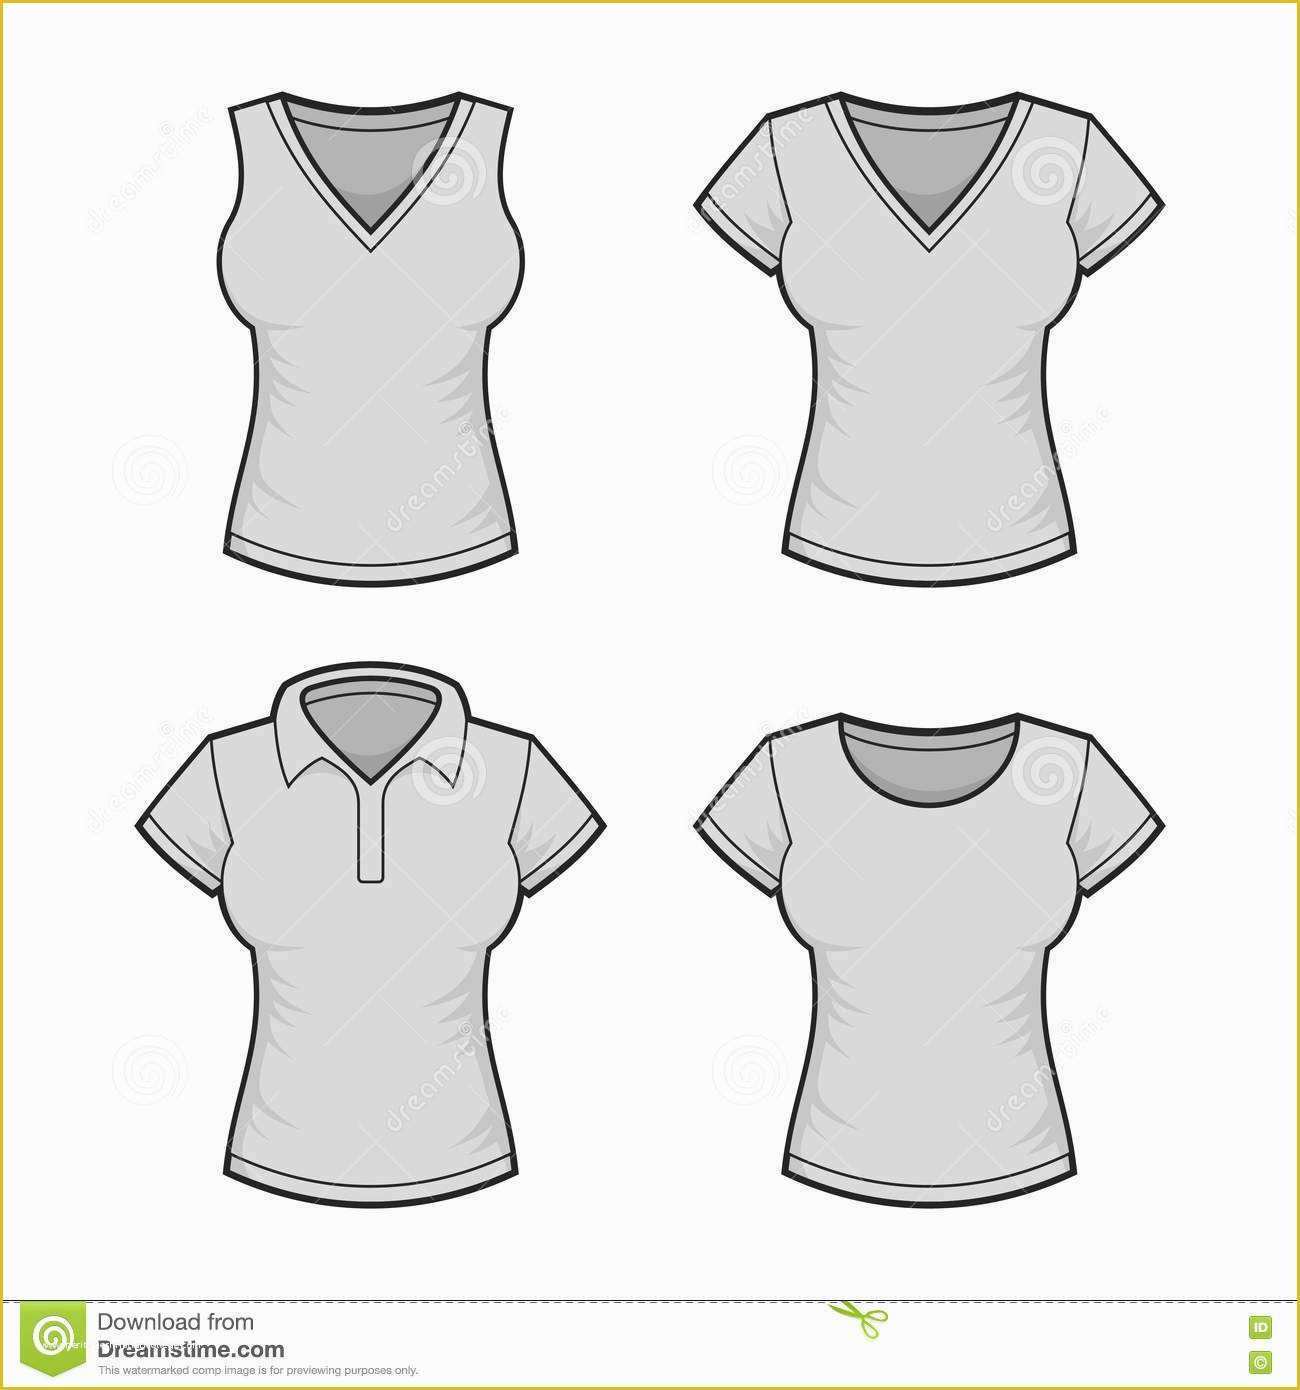 t-shirt-template-vector-free-download-of-illustrator-shirt-template-download-free-t-shirt